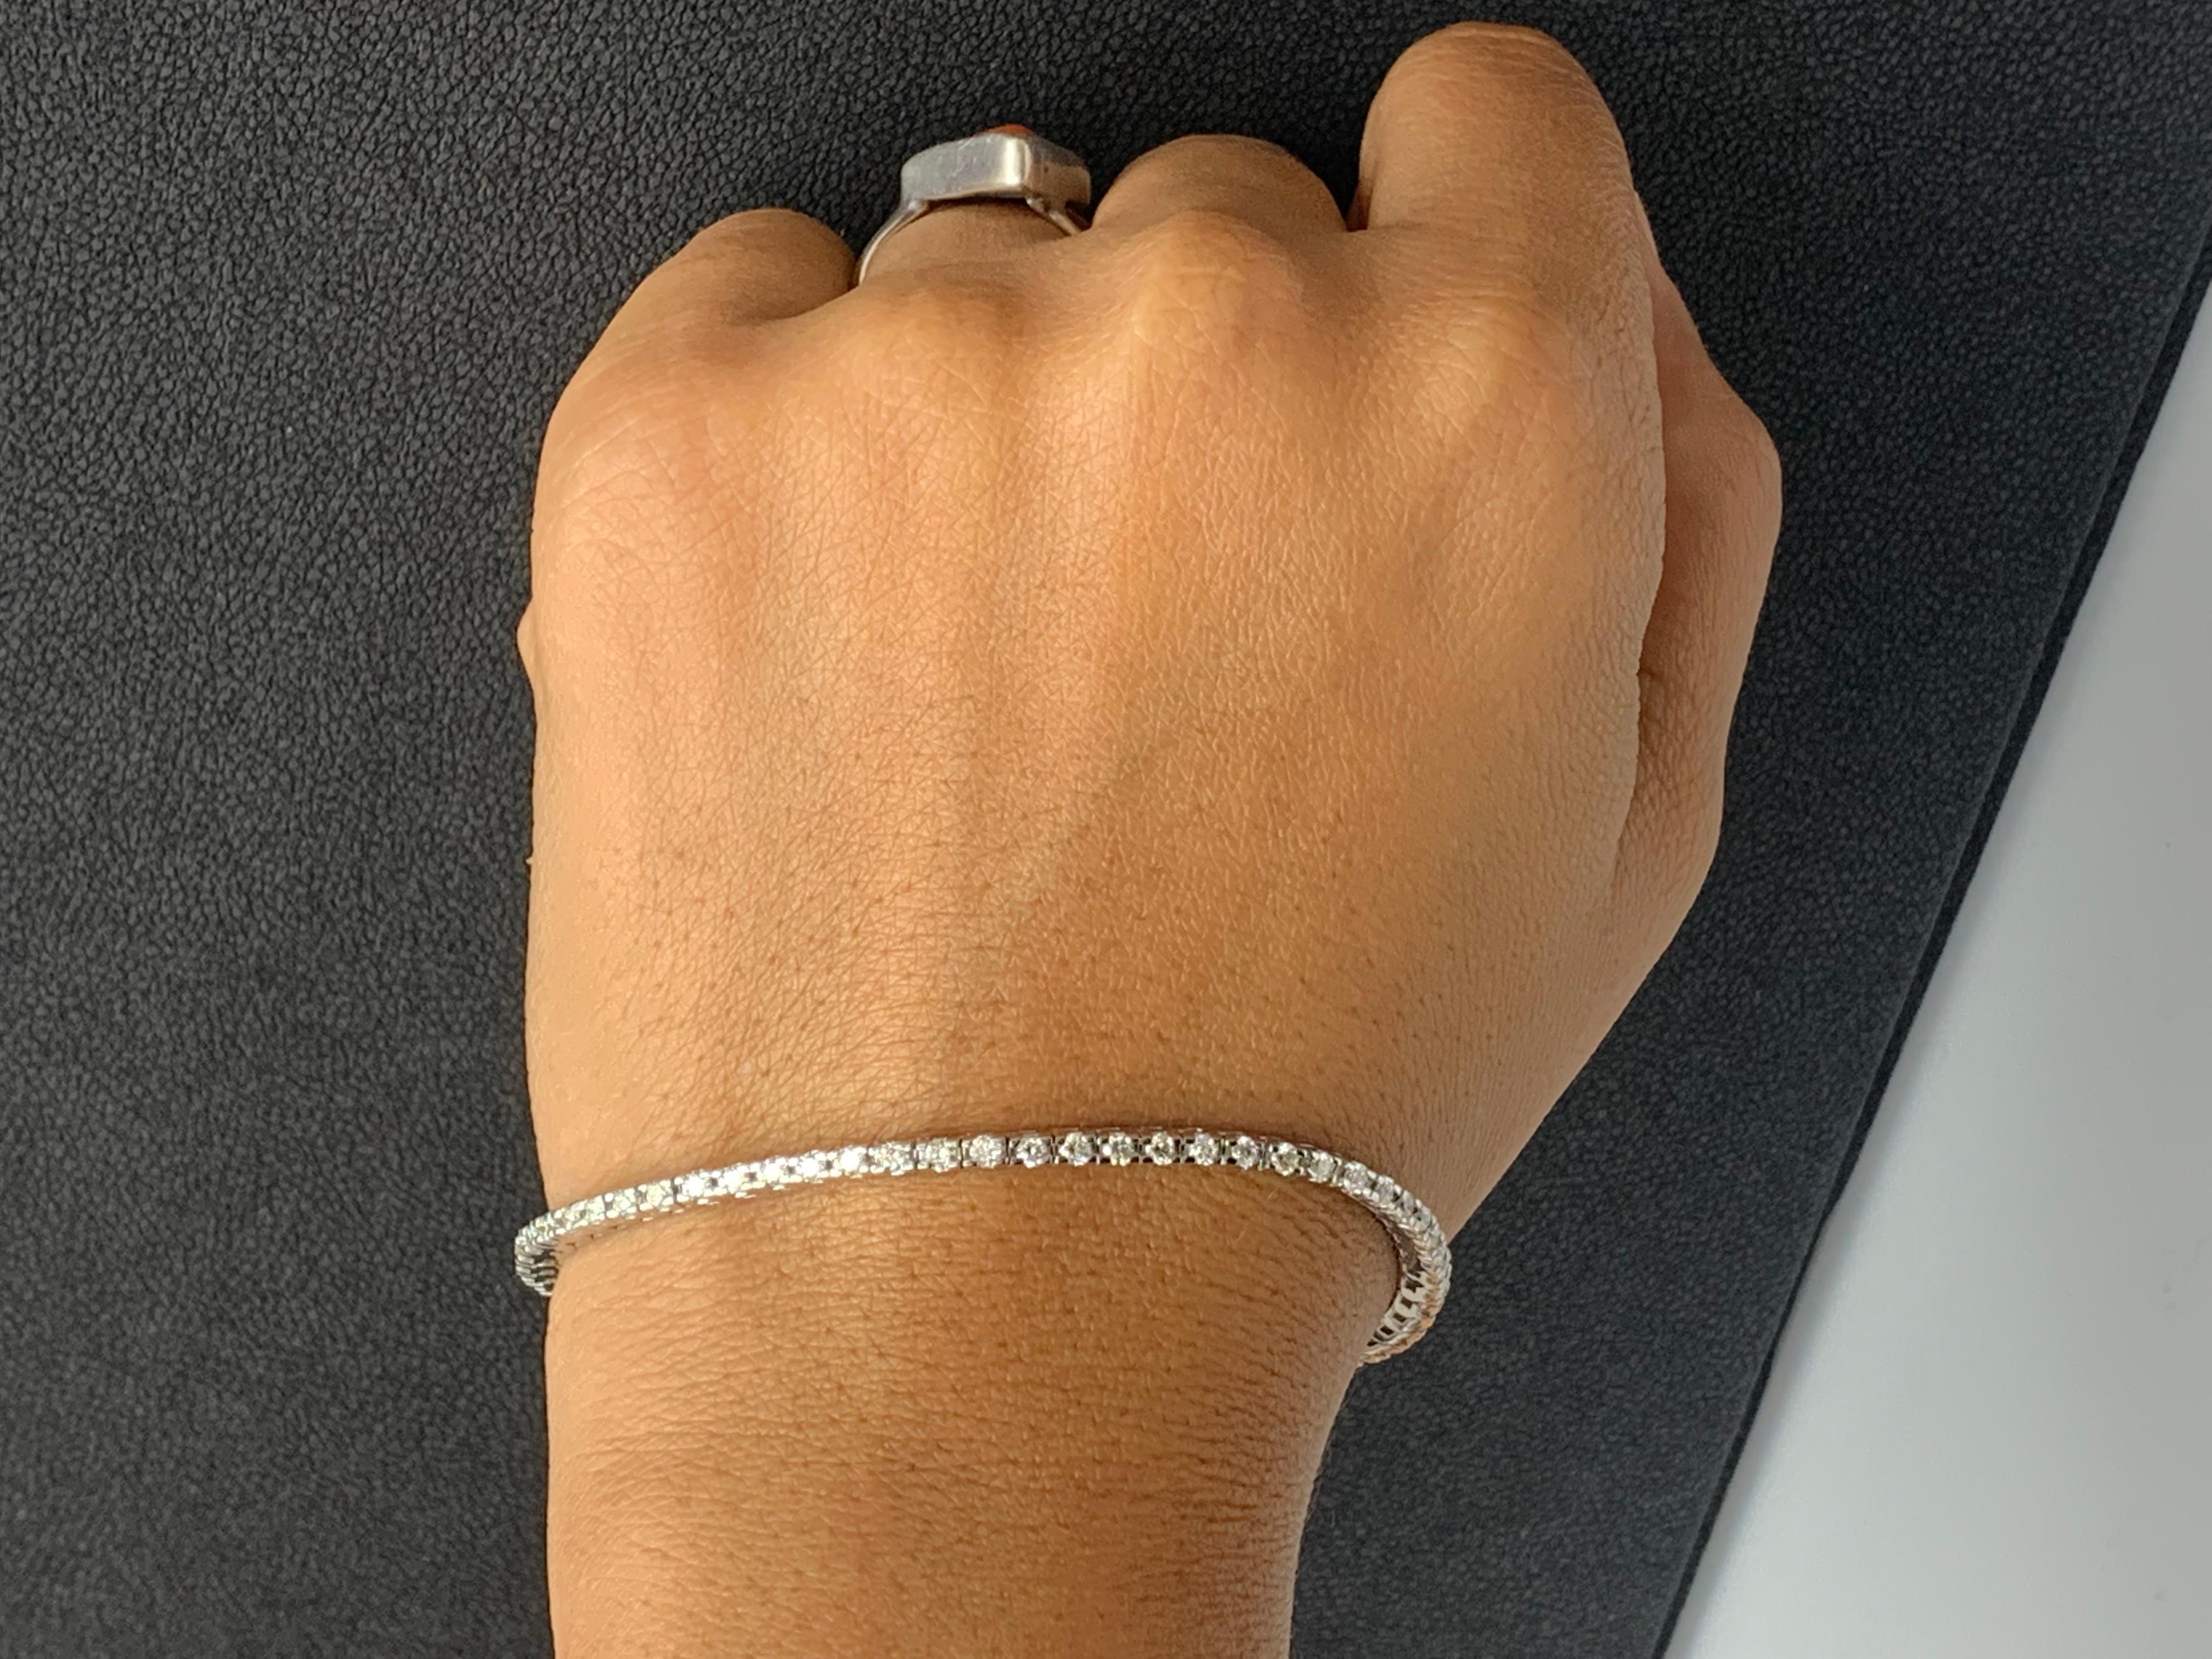 A classic tennis bracelet style showcasing a row of round brilliant diamonds, set in a polished 14k white gold mounting. 62 Diamonds weigh 2.00 carats total and are approximately GH color, SI1 clarity.

Style available in different price ranges.